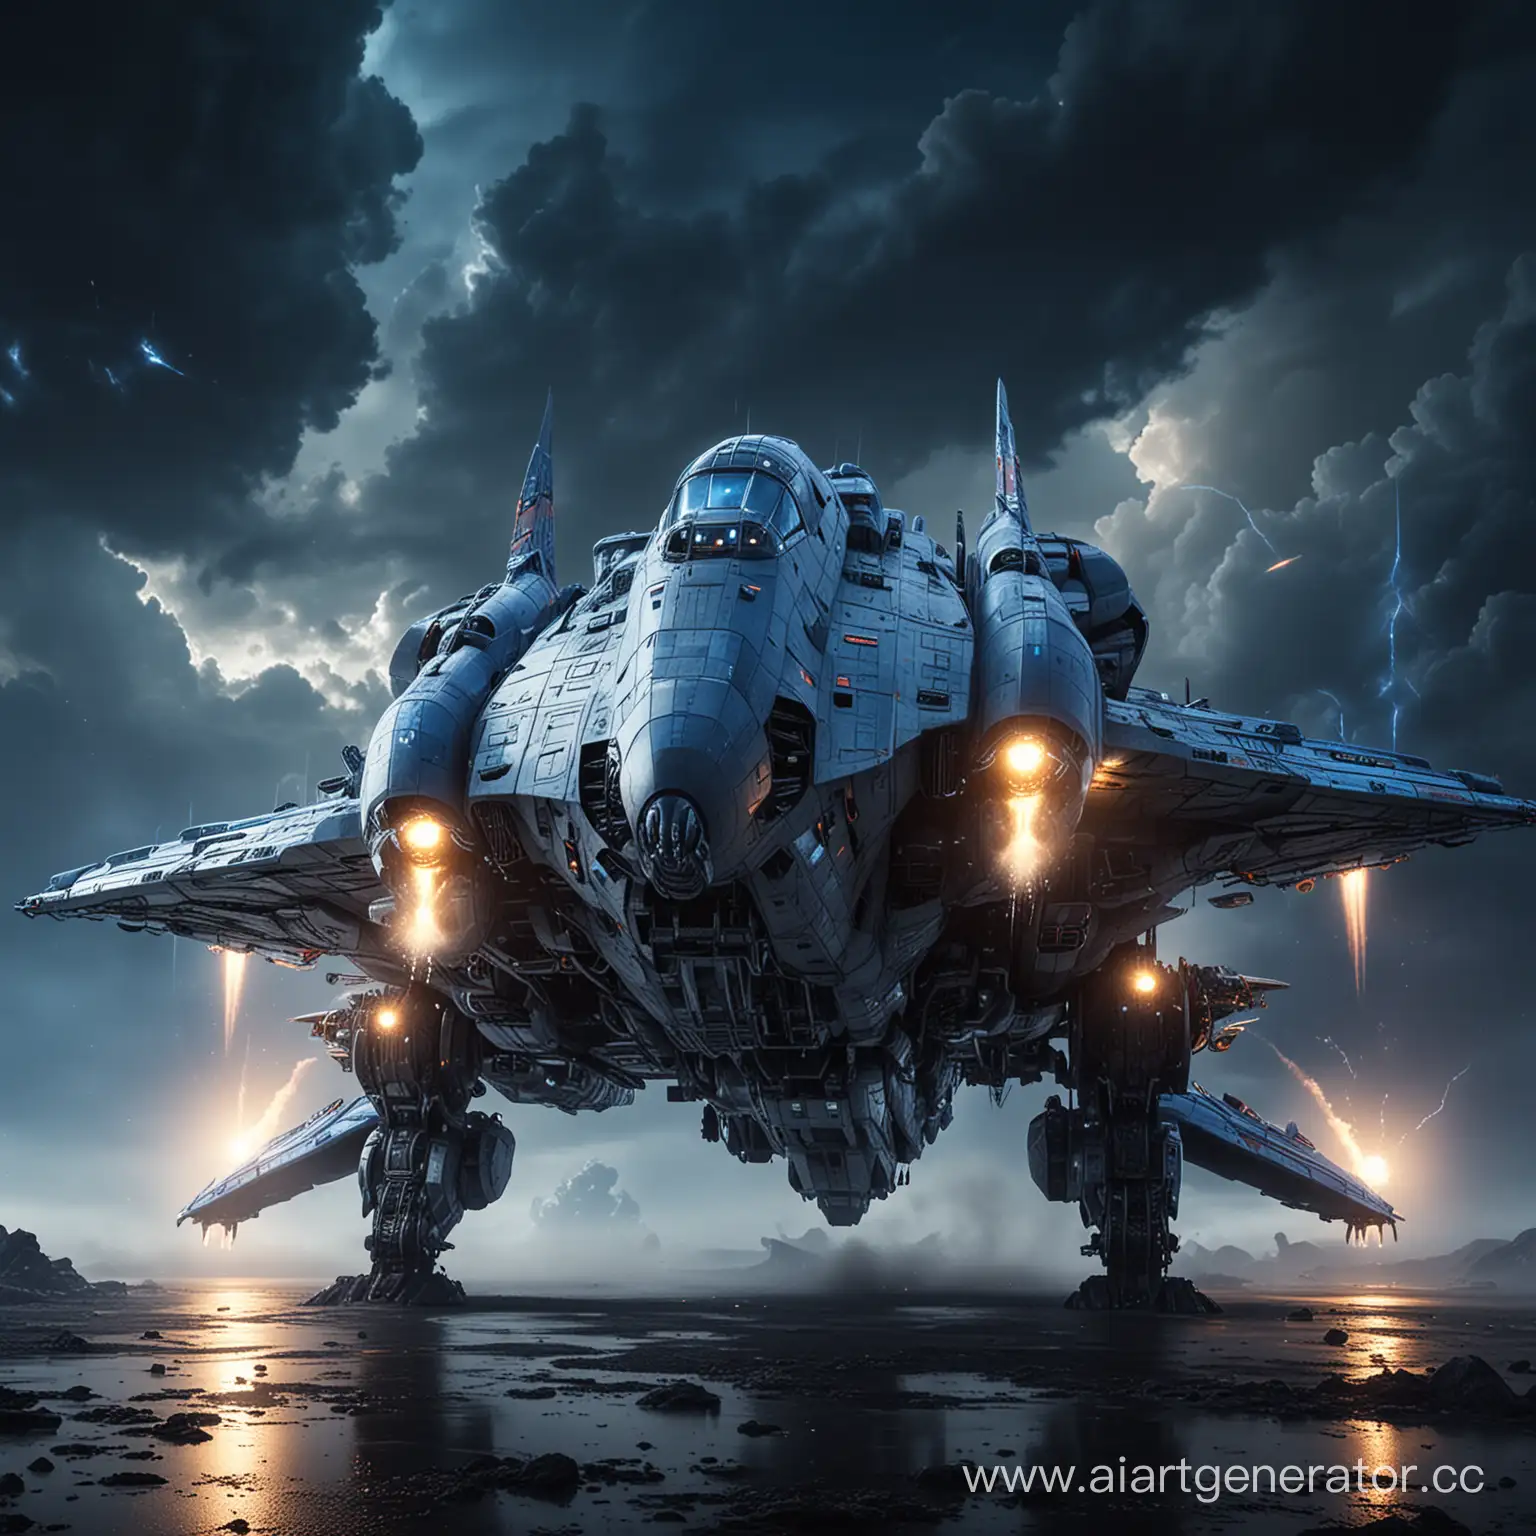 Future-Russian-Giant-Battle-Epic-Spaceship-with-Blue-Lighting